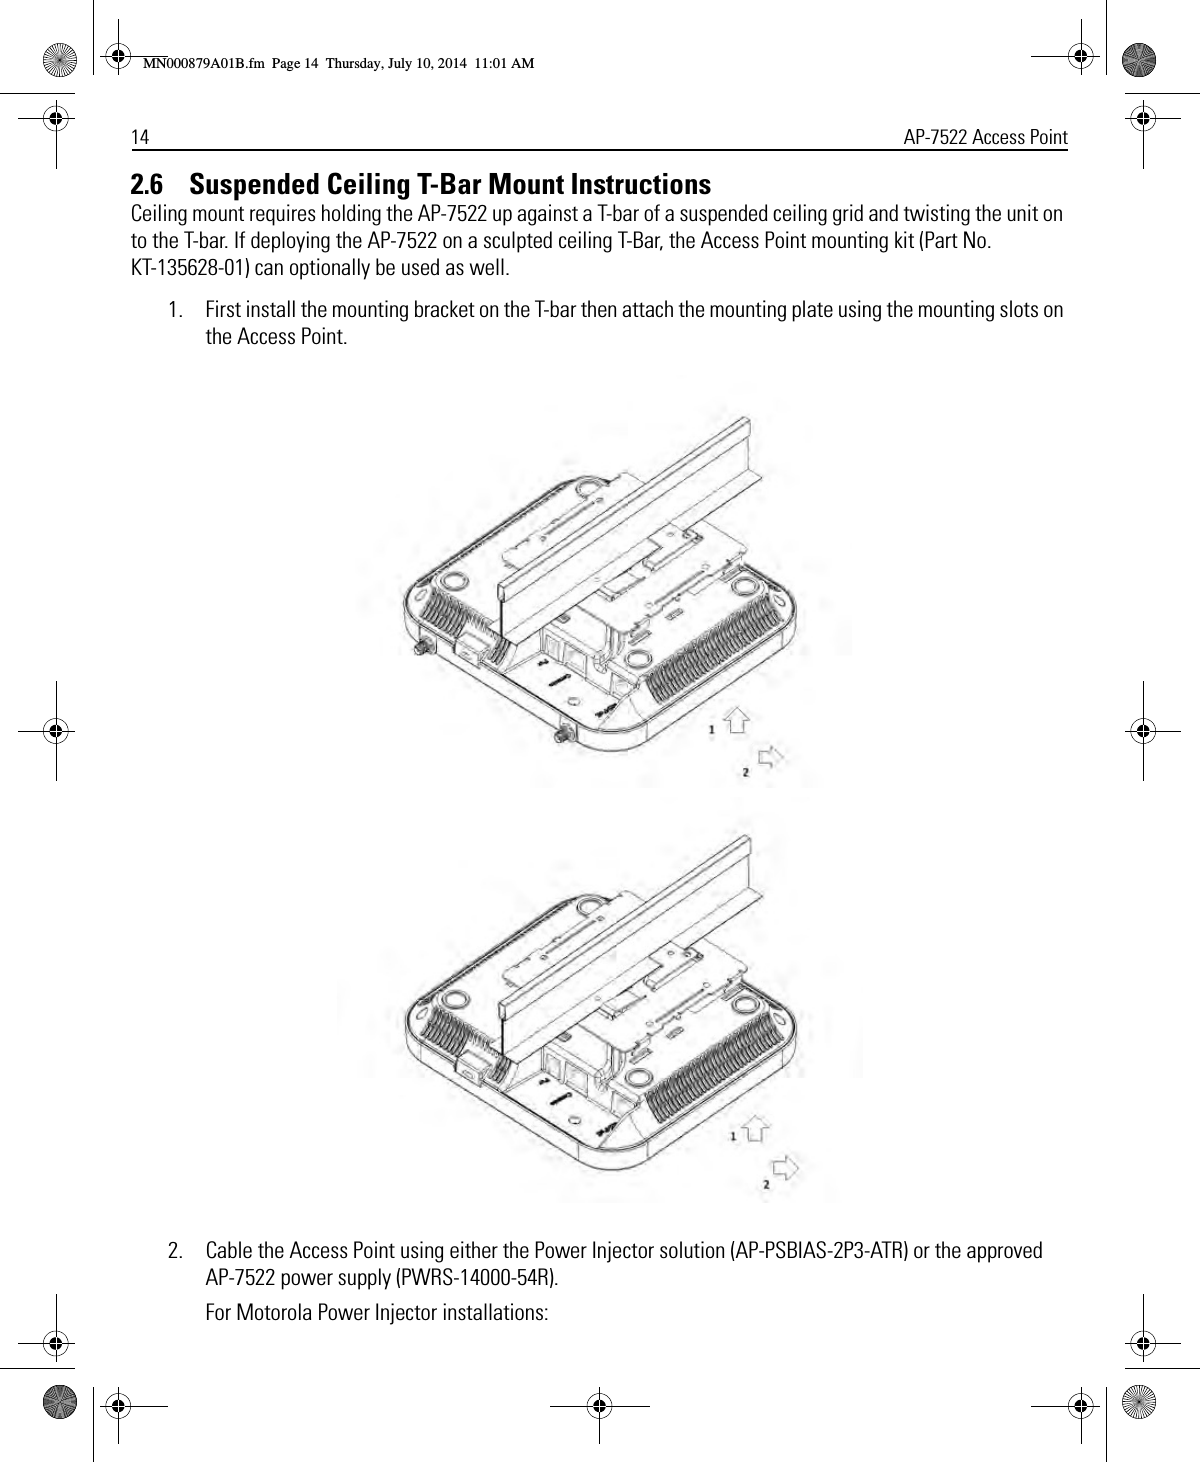 14 AP-7522 Access Point2.6    Suspended Ceiling T-Bar Mount InstructionsCeiling mount requires holding the AP-7522 up against a T-bar of a suspended ceiling grid and twisting the unit on to the T-bar. If deploying the AP-7522 on a sculpted ceiling T-Bar, the Access Point mounting kit (Part No. KT-135628-01) can optionally be used as well.1. First install the mounting bracket on the T-bar then attach the mounting plate using the mounting slots on the Access Point.2. Cable the Access Point using either the Power Injector solution (AP-PSBIAS-2P3-ATR) or the approved AP-7522 power supply (PWRS-14000-54R).For Motorola Power Injector installations:MN000879A01B.fm  Page 14  Thursday, July 10, 2014  11:01 AM